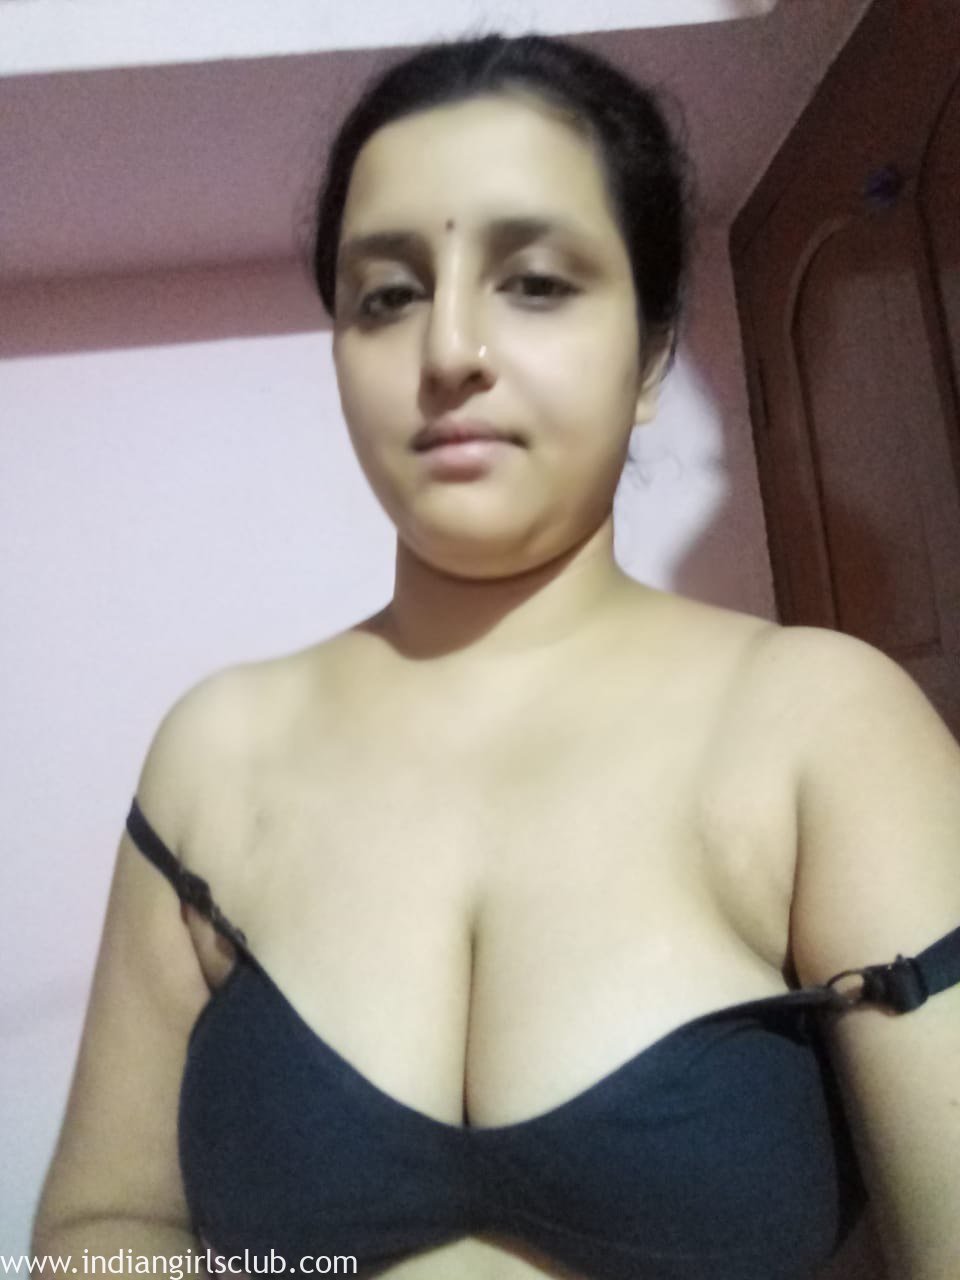 big-tits-bengali-indian-housewife-ready-for-hot-sex-20 - Indian Girls Club 